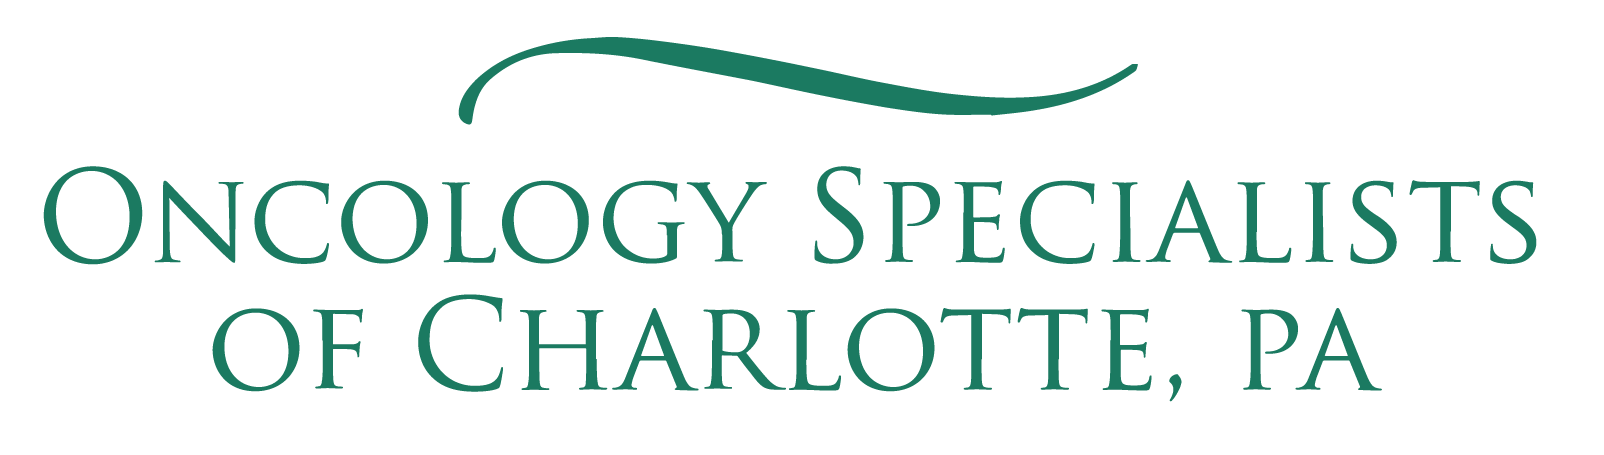 Oncology Specialists of Charlotte